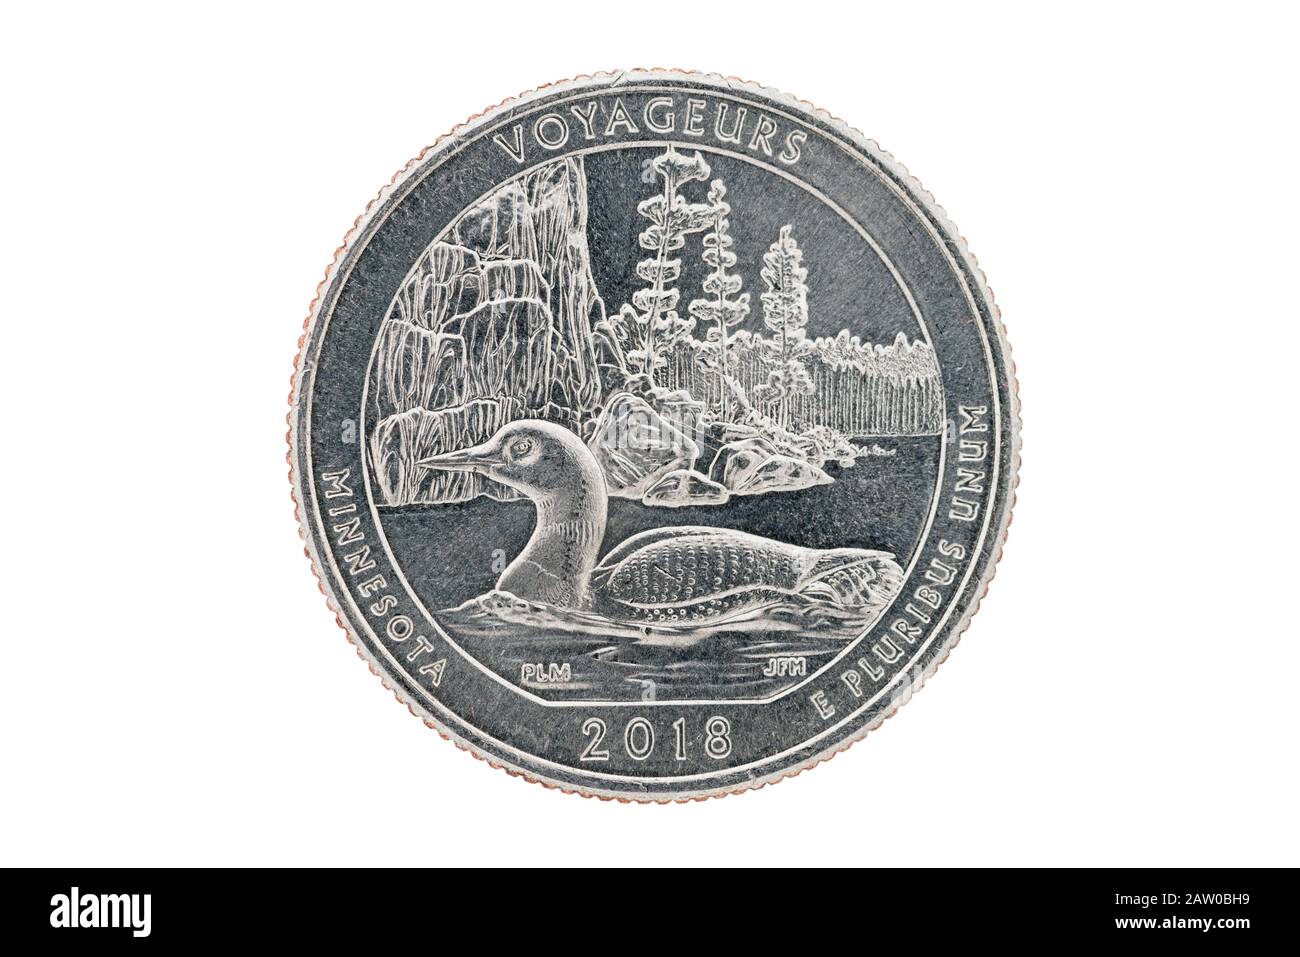 Voyageurs Park Minnesota commemorative quarter coin with loon isolated on white Stock Photo